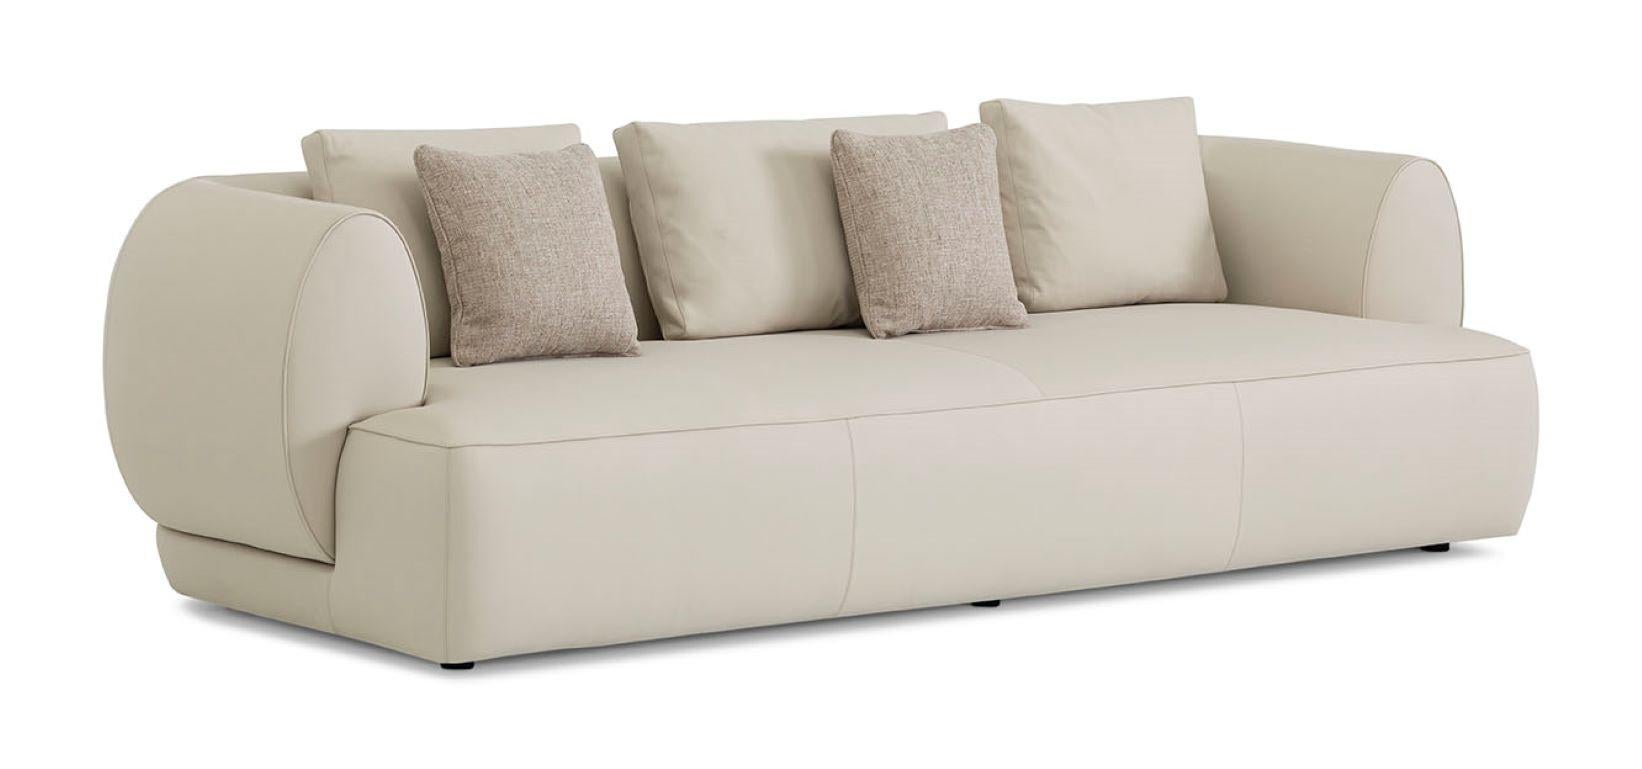 Comfortable and welcoming, the Botero is a modular monocoque sofa with soft lines and a comfortable seat. The cover, completely removable and washable, can be in fabric or leather. The different modules, including chaise lounge, corner module,